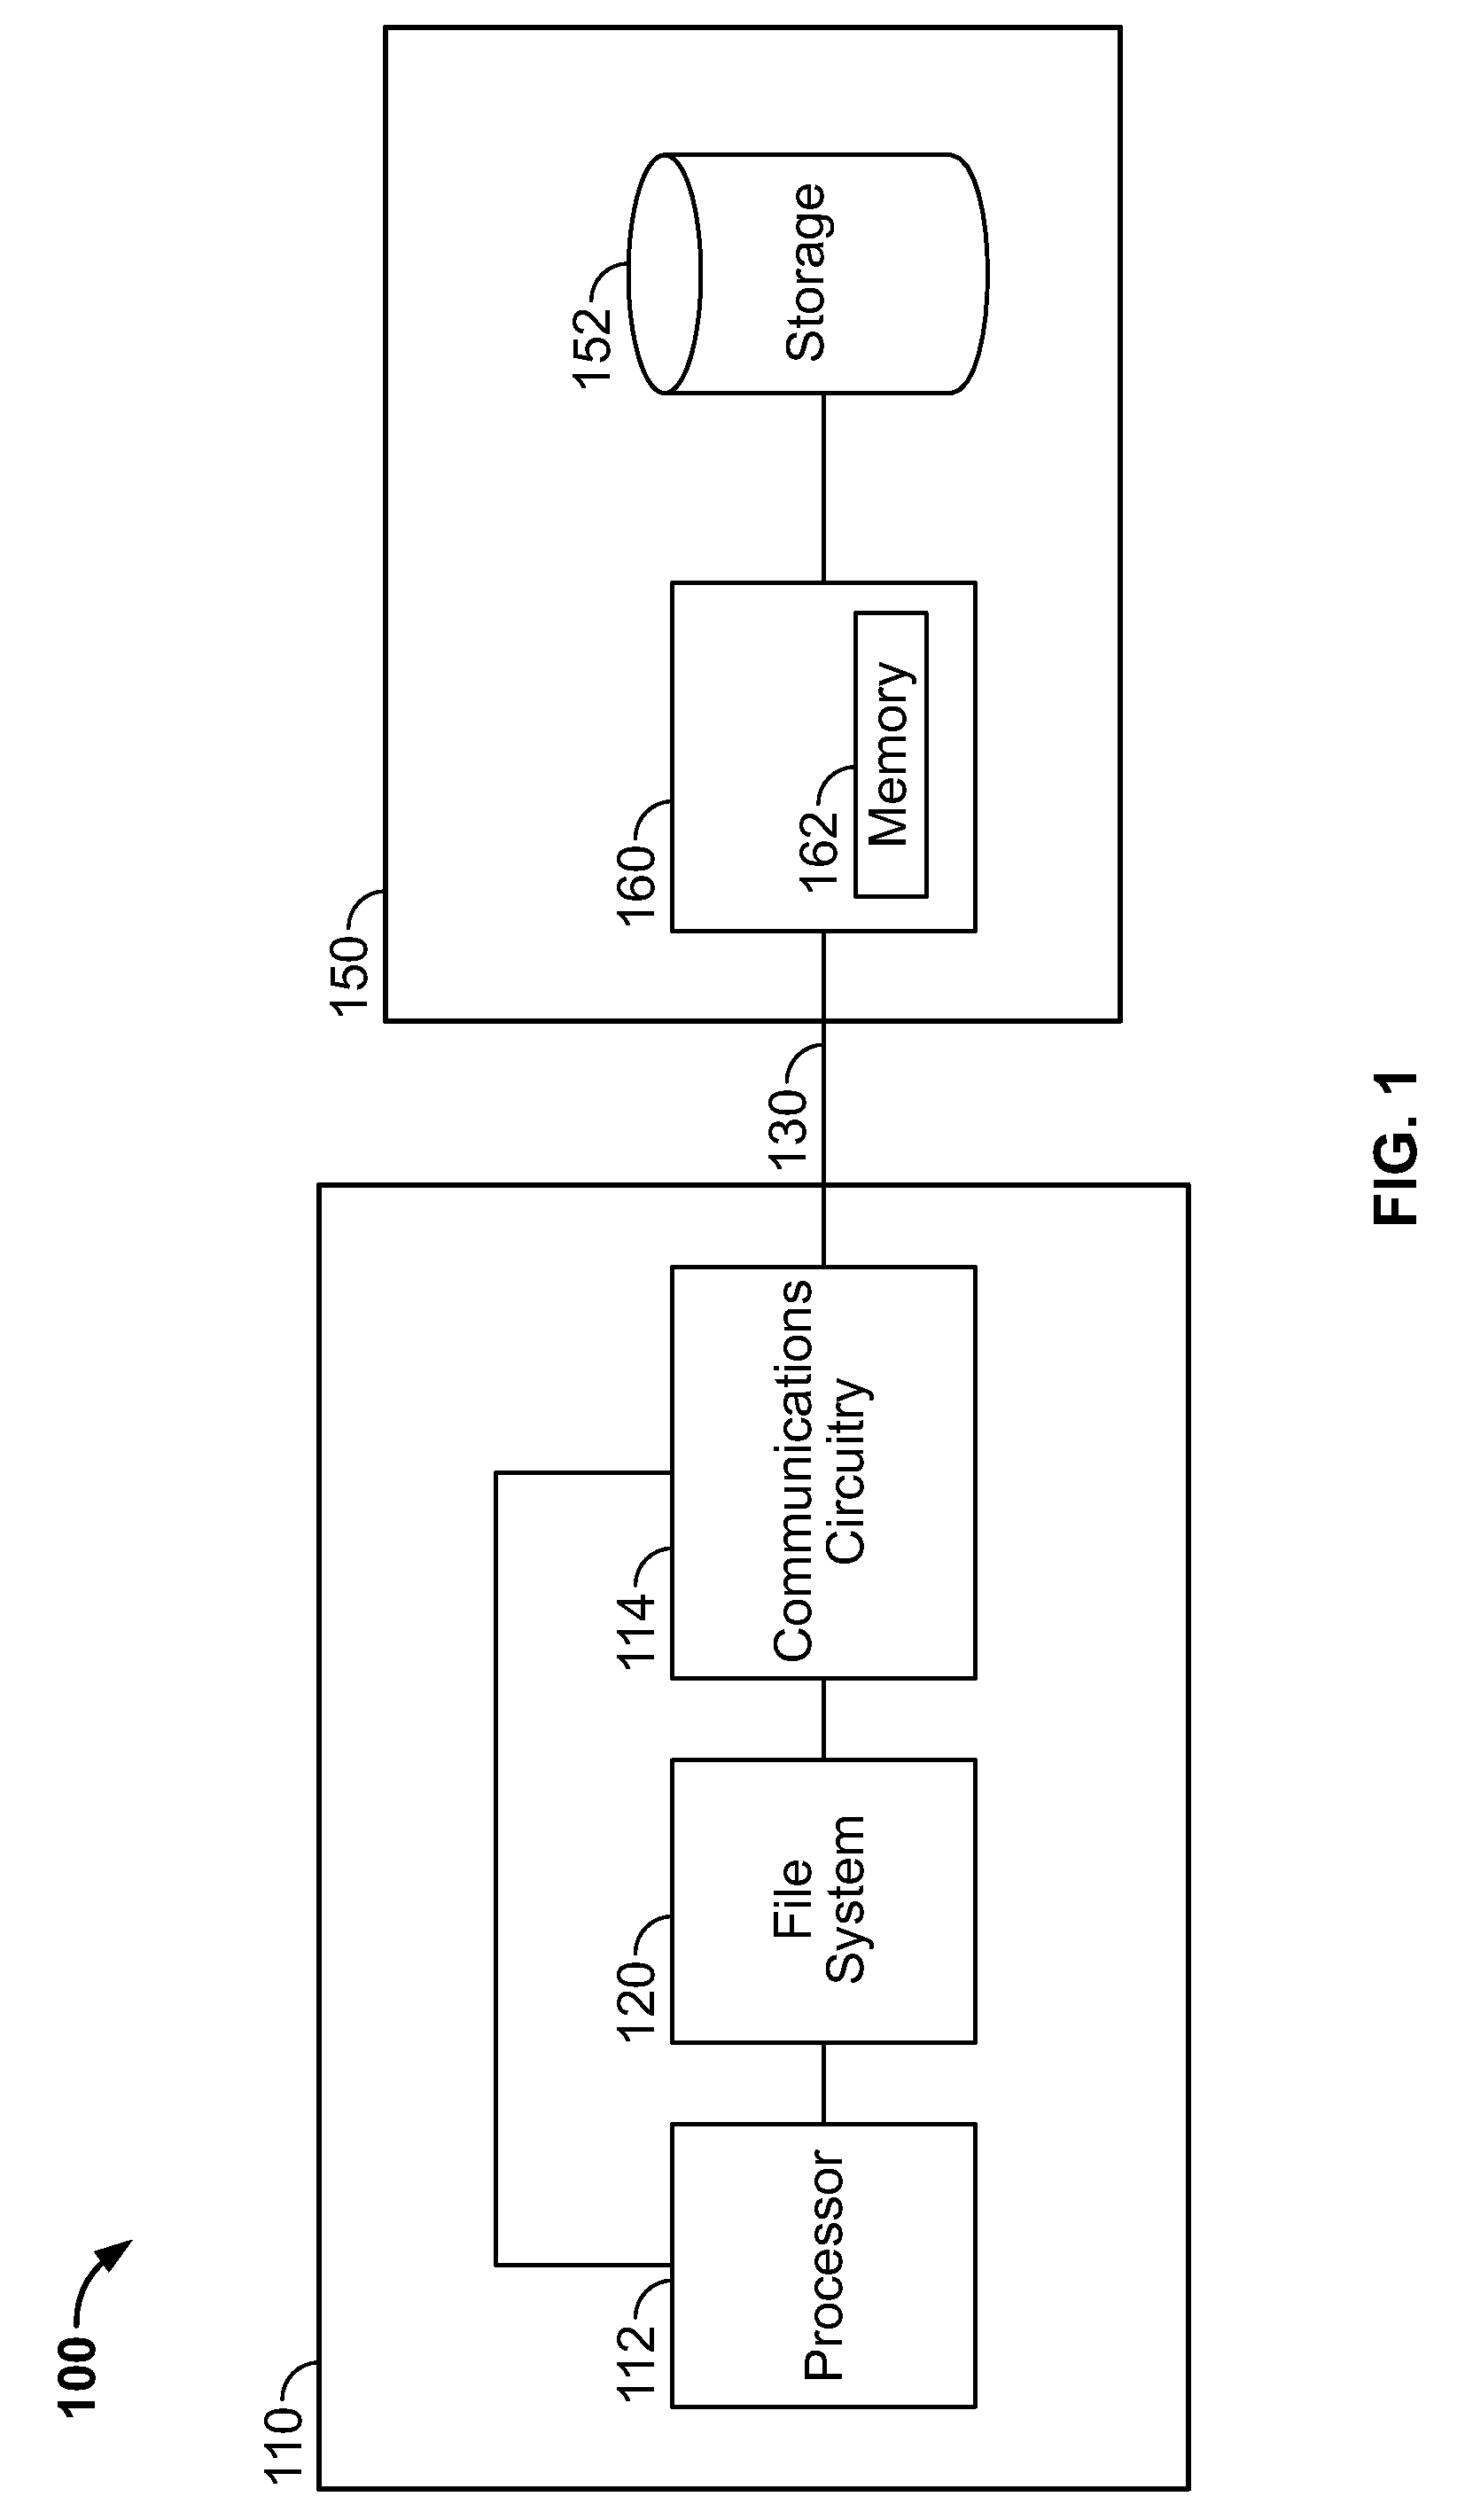 Systems and methods for sideband communication between device and host to minimize file corruption